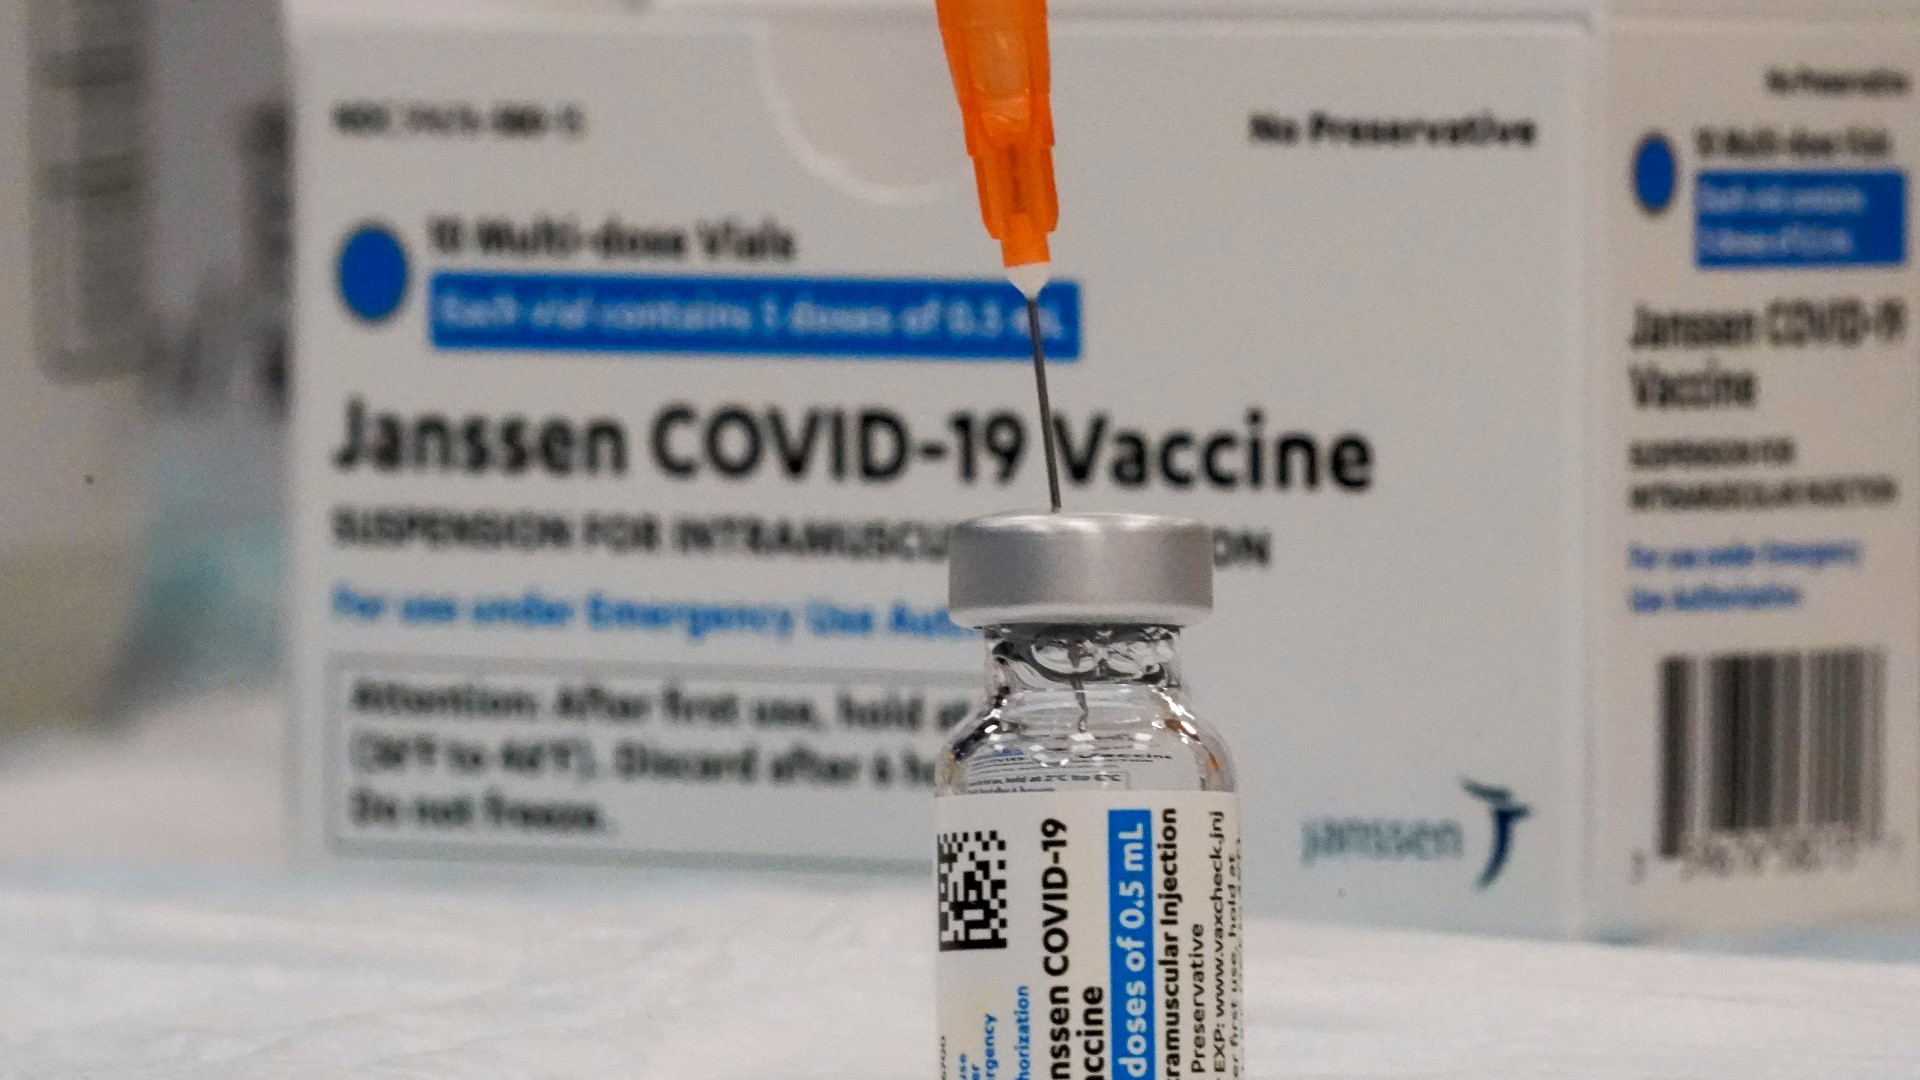 Hundreds of vaccinations in Iowa were canceled after the Iowa Department of Public Health advised providers to stop using the J&J vaccine.